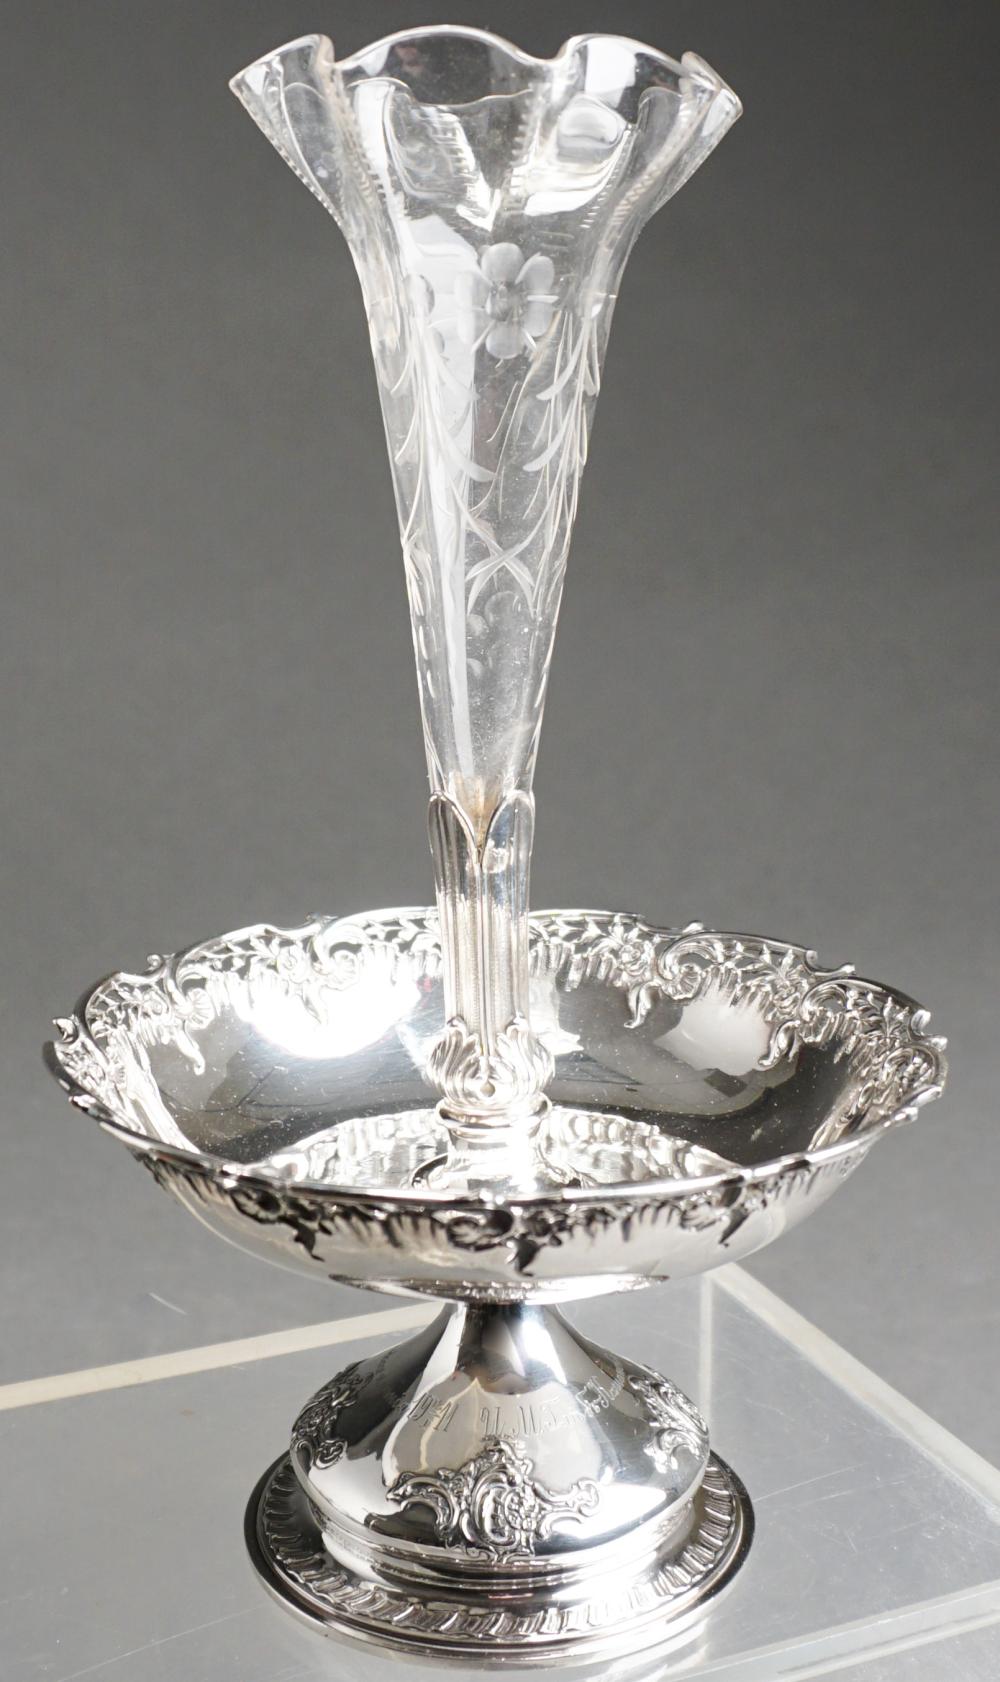 IMPERIAL RUSSIAN 84 SILVER EPERGNE 32e159